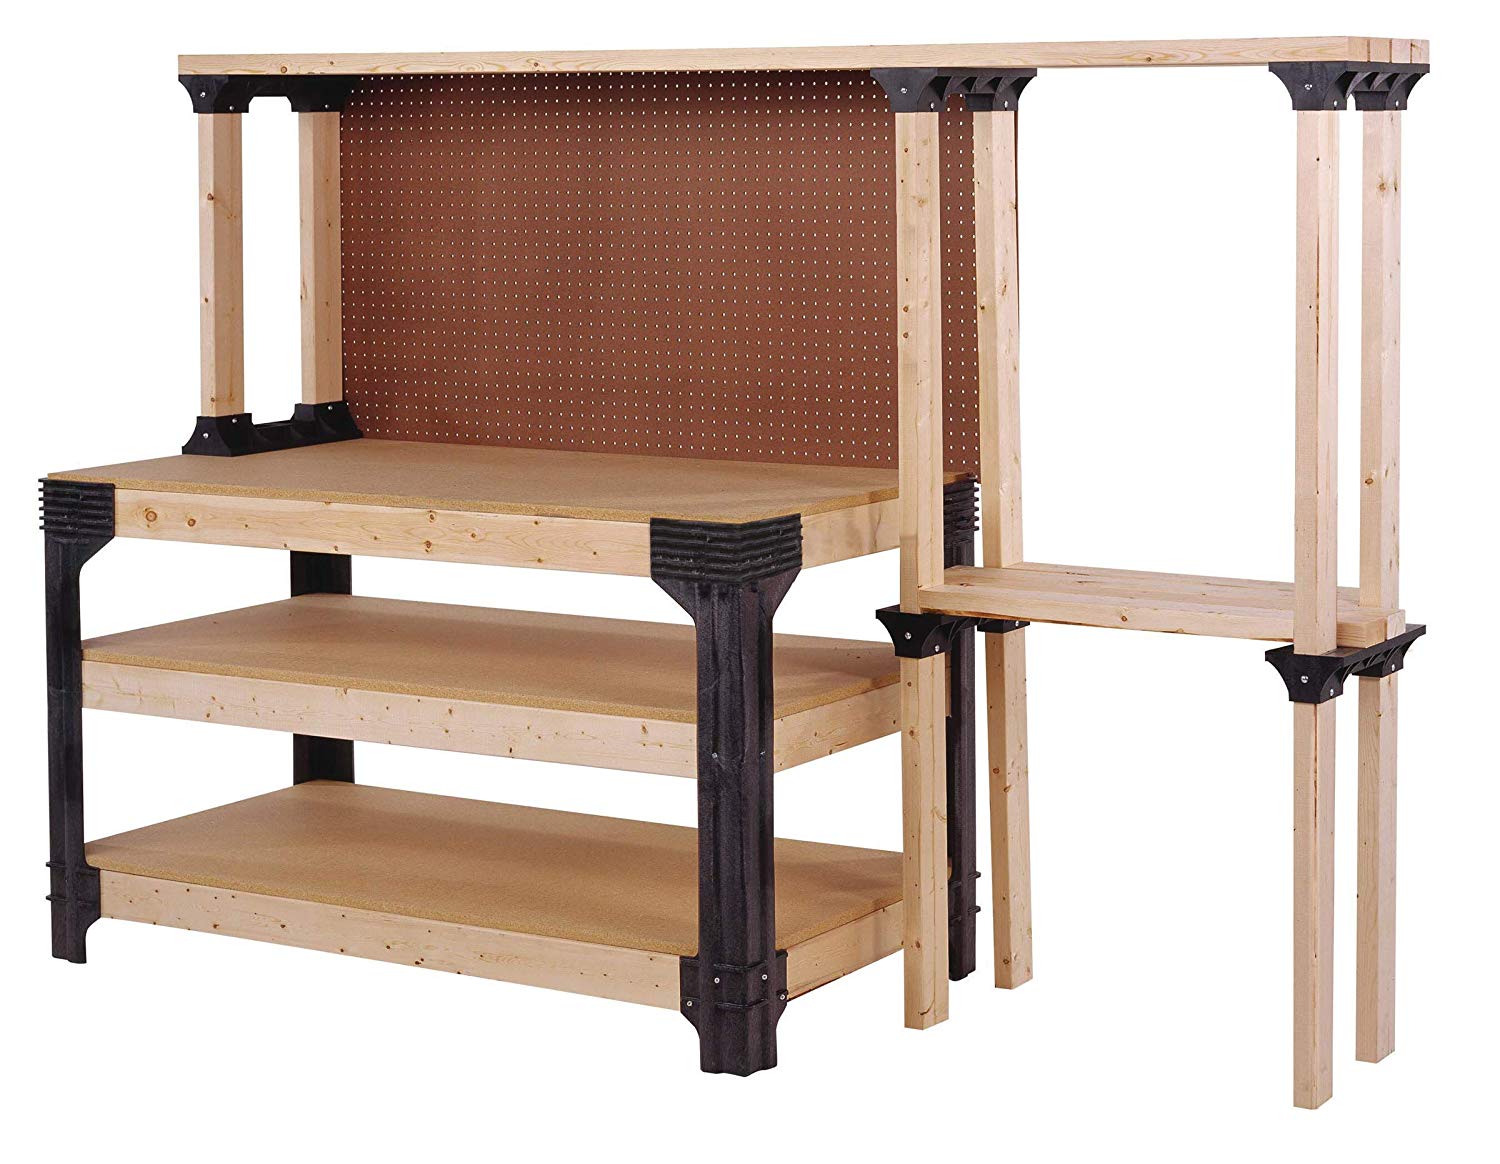 Hopkins 2x4 Basics Work Bench Legs, Wood,Made of Durable, Maintenance-Free Structural Resin - image 5 of 9